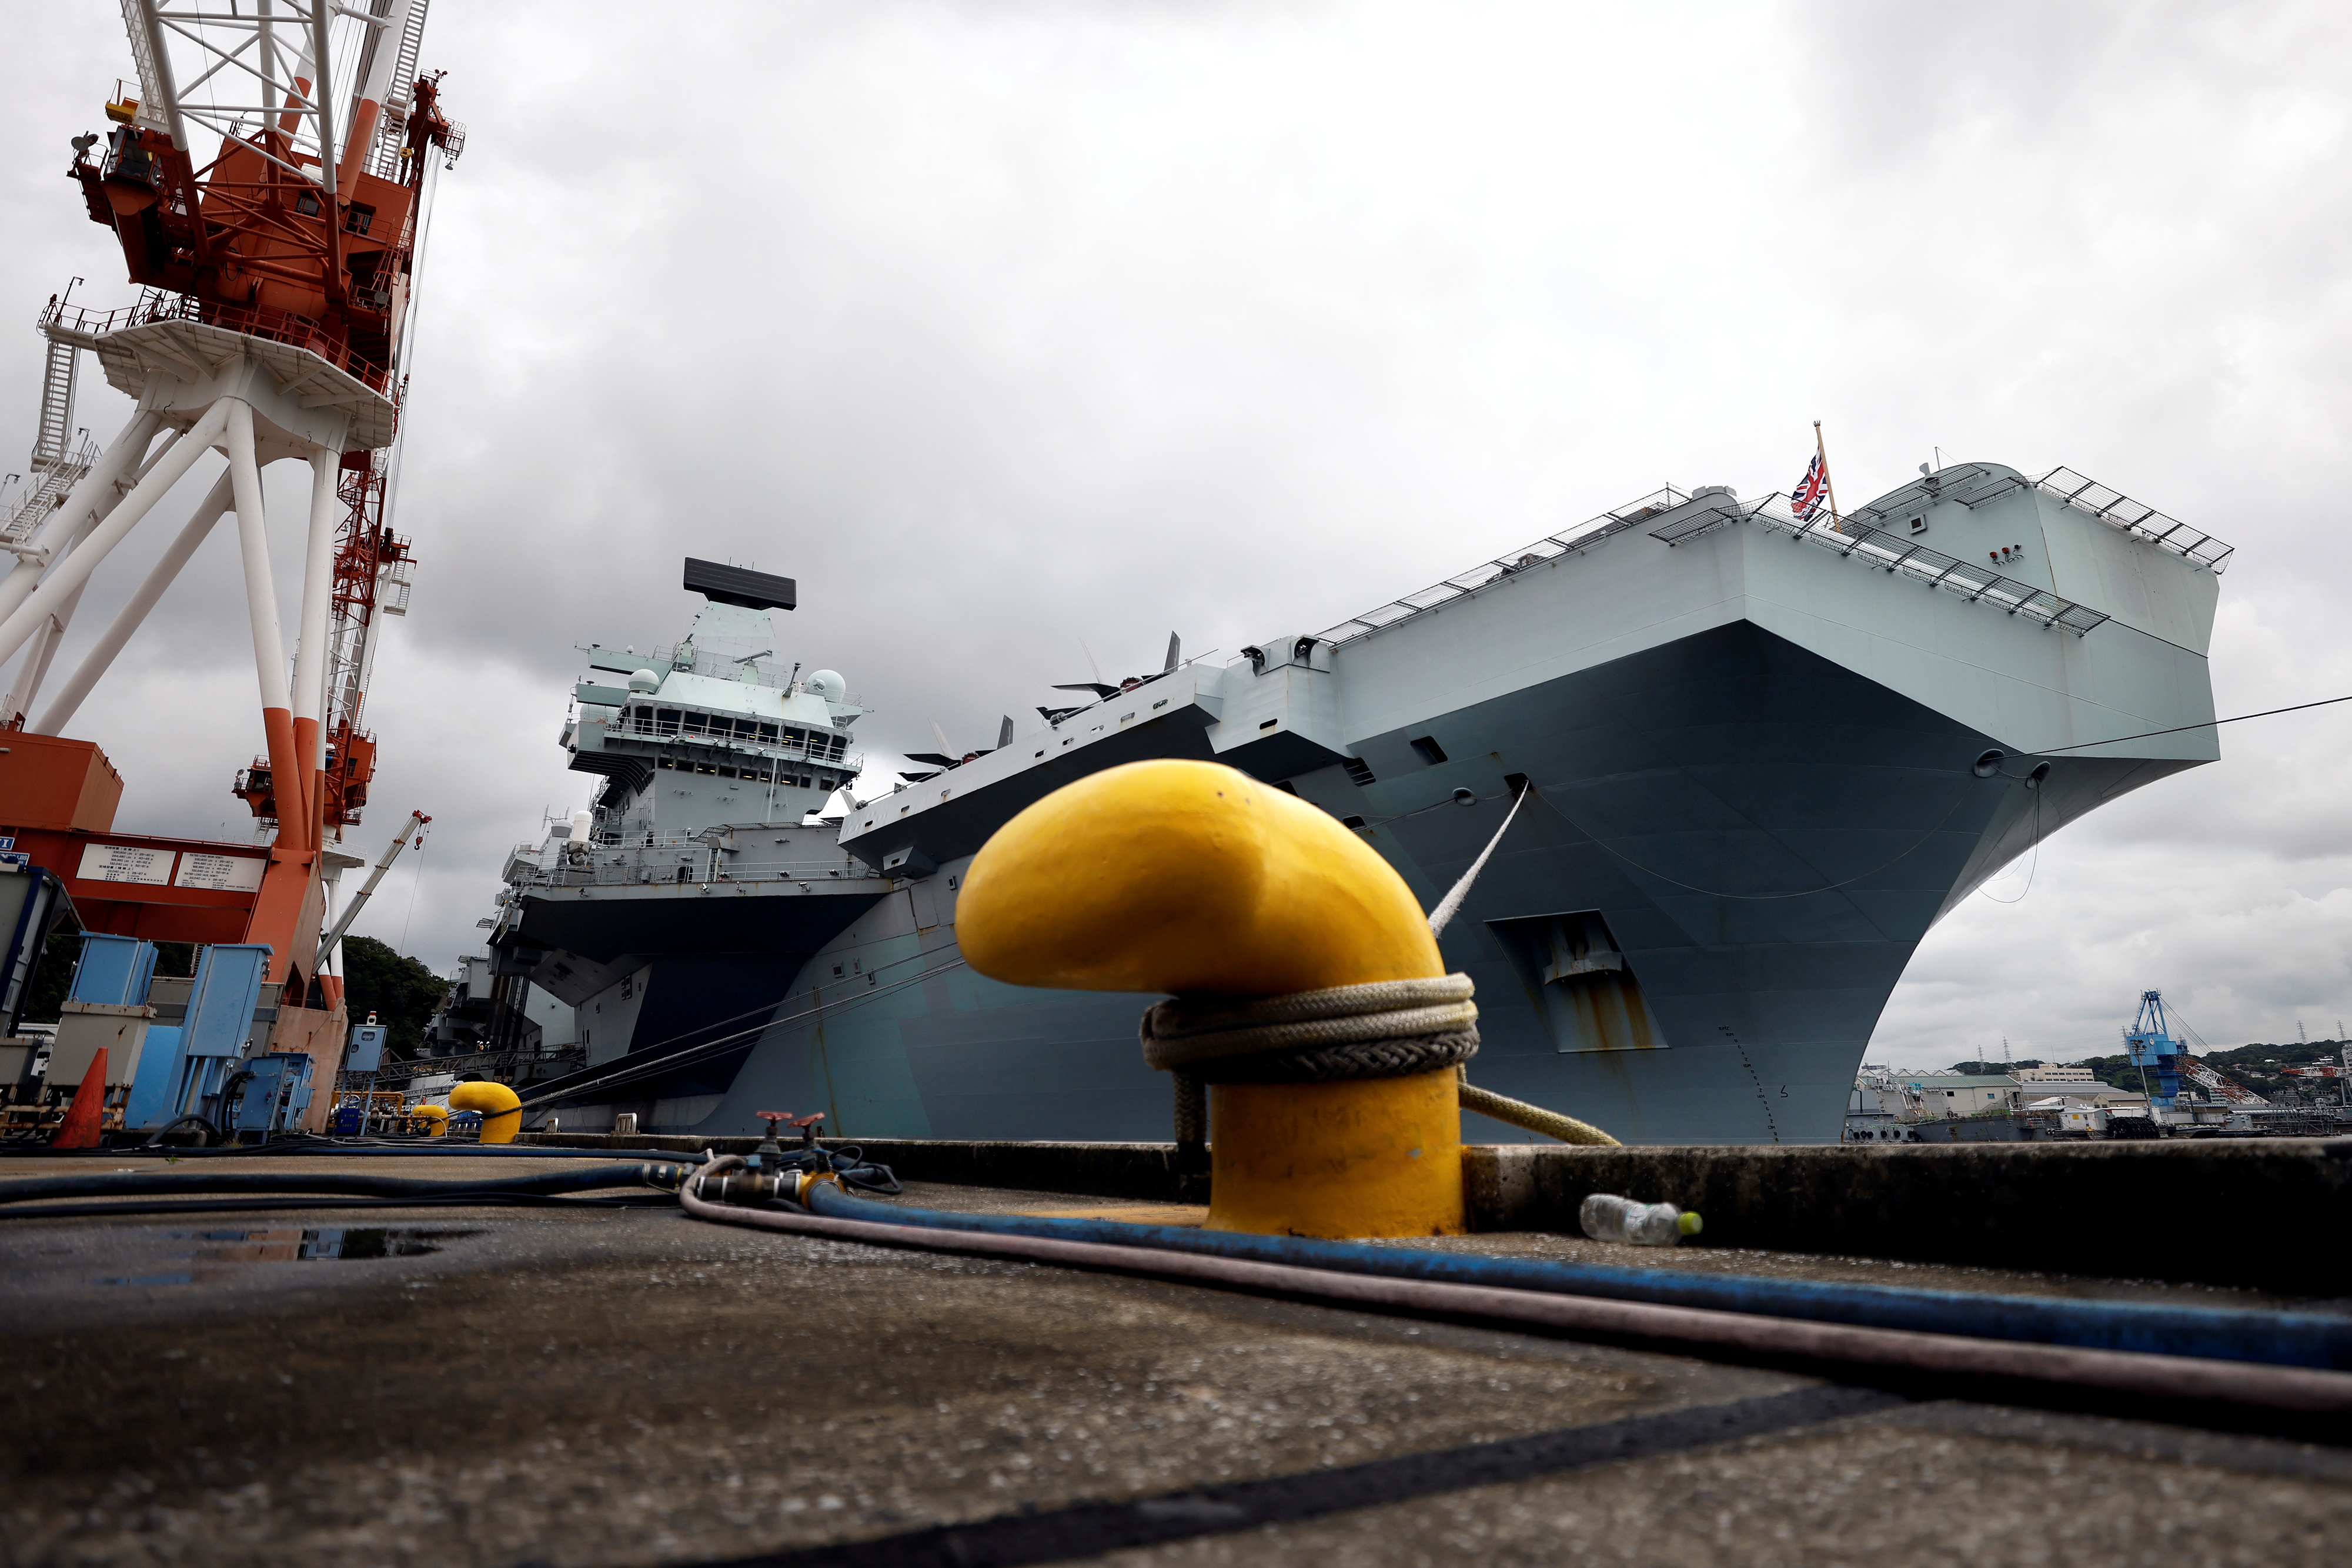 A view of the British Royal Navy's HMS Queen Elizabeth aircraft carrier at the U.S. naval base in Yokosuka